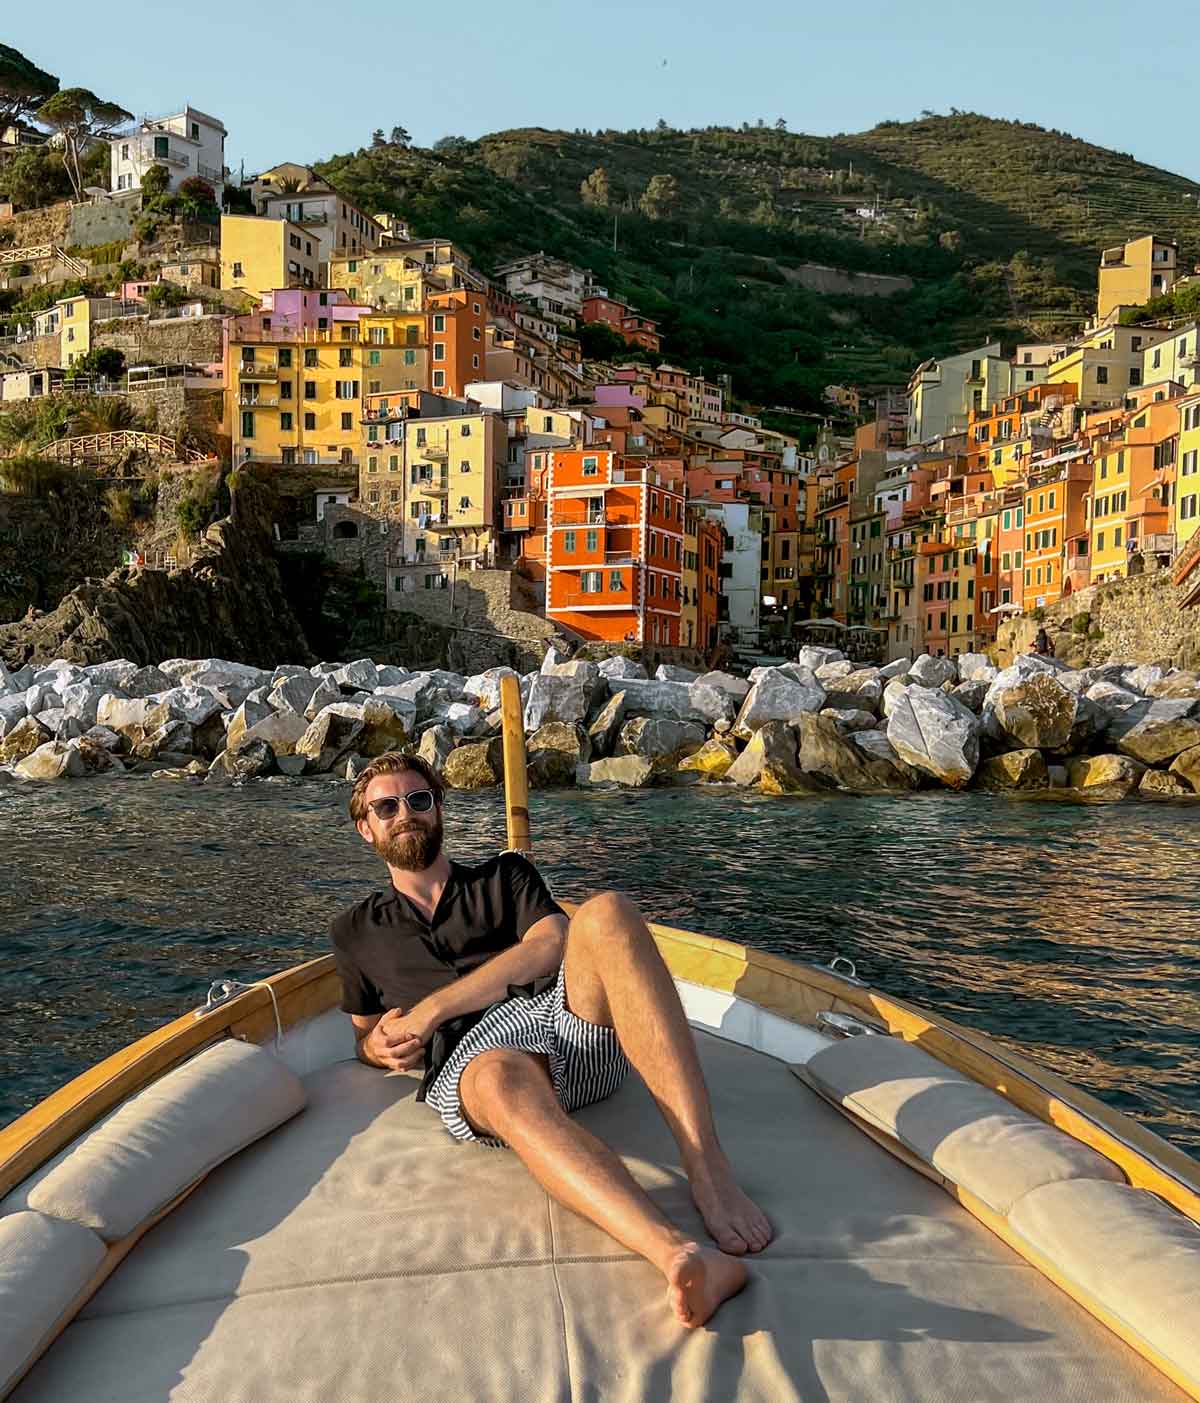 Justin laying on boat with the colourful village of Riomaggiore behind